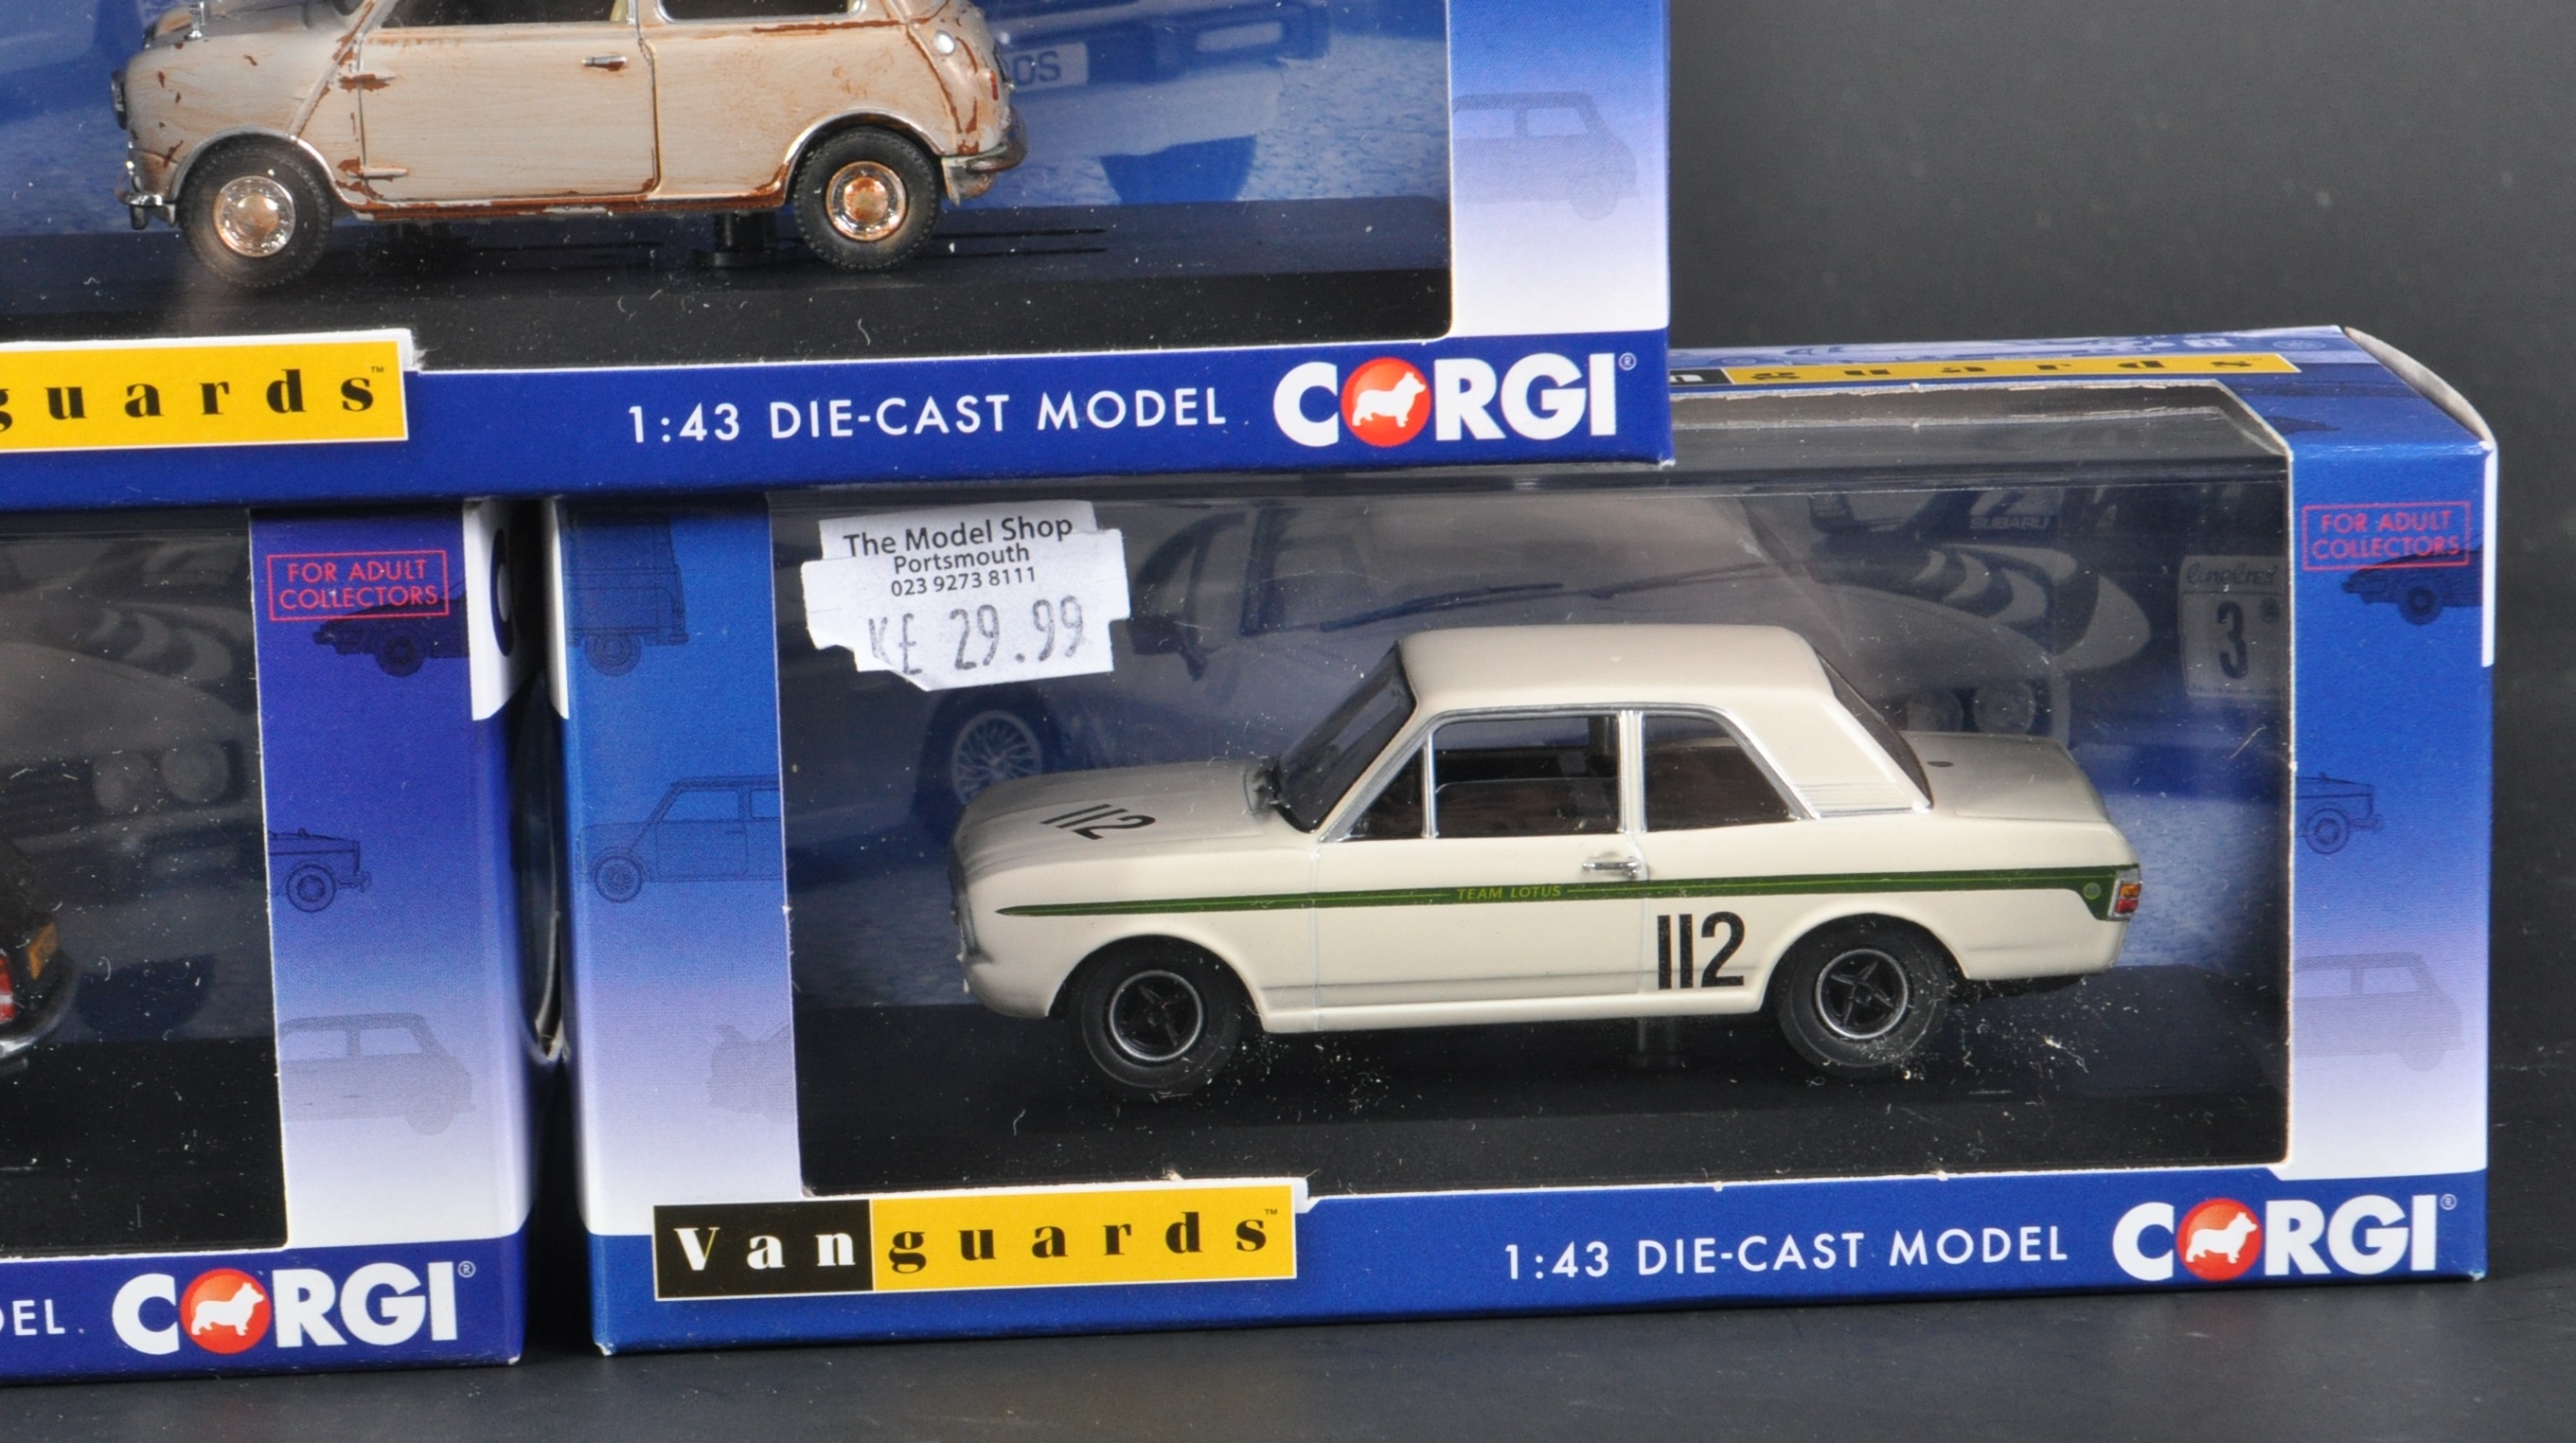 COLLECTION OF CORGI VANGUARDS 1/43 SCALE DIECAST MODEL CARS - Image 5 of 6